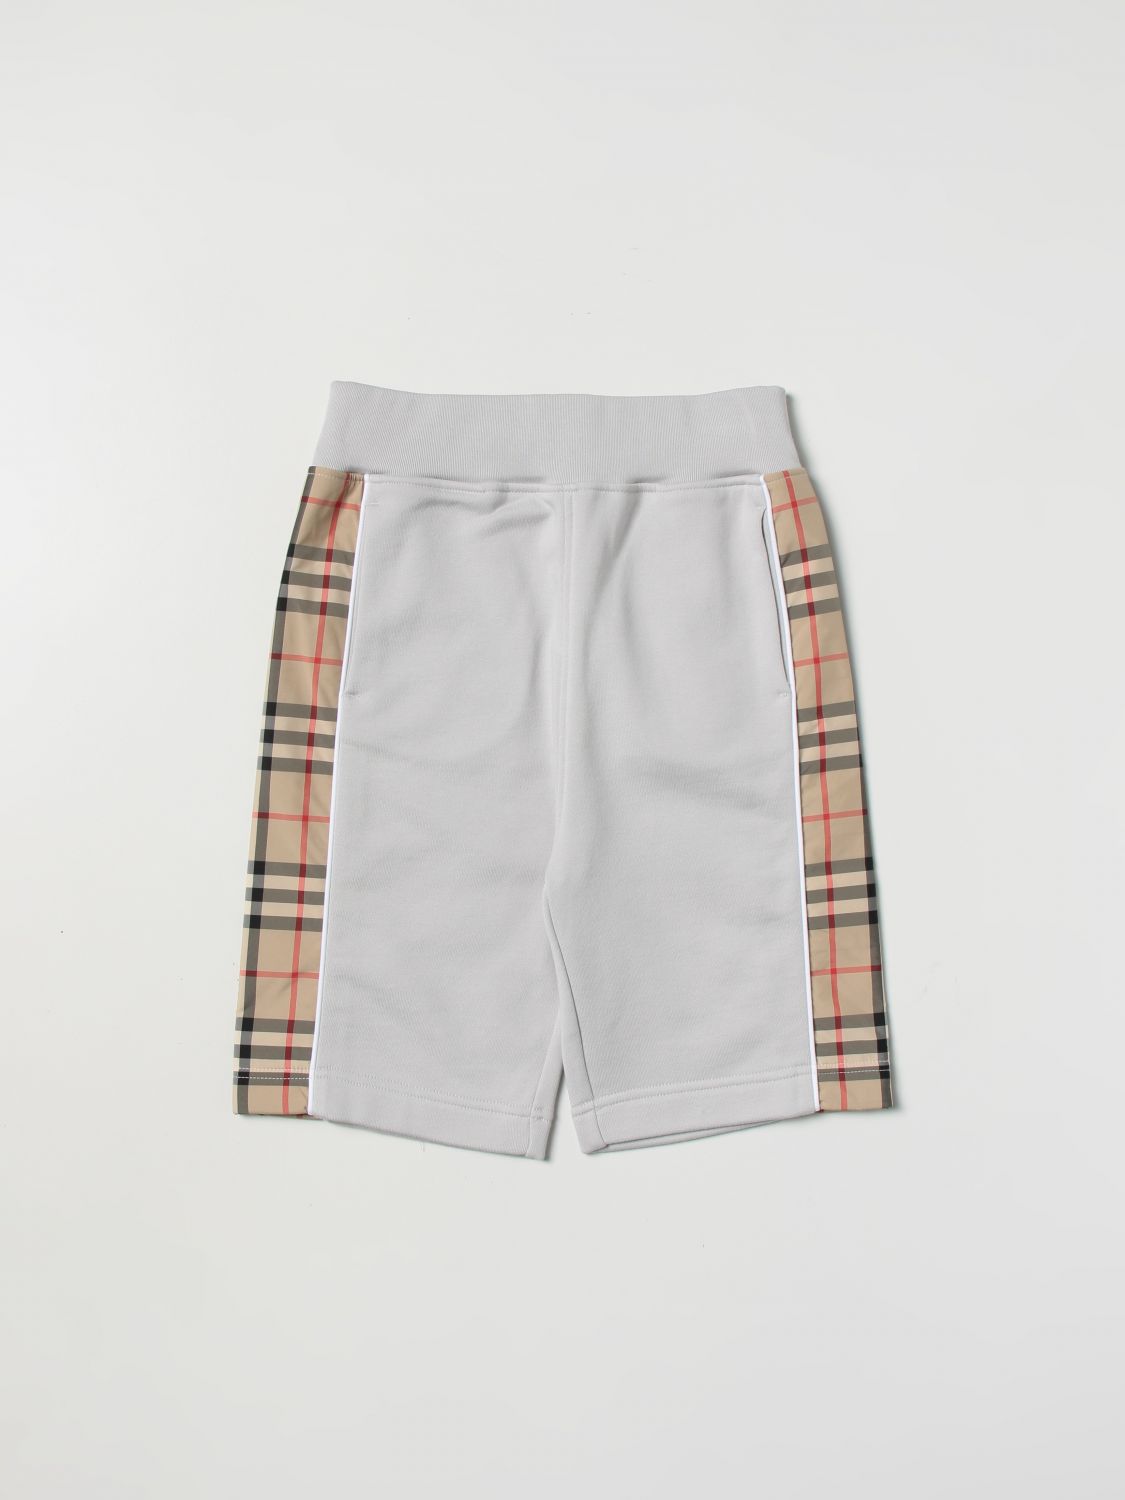 BURBERRY: shorts for boys - Grey | Burberry shorts 8065717 online on  